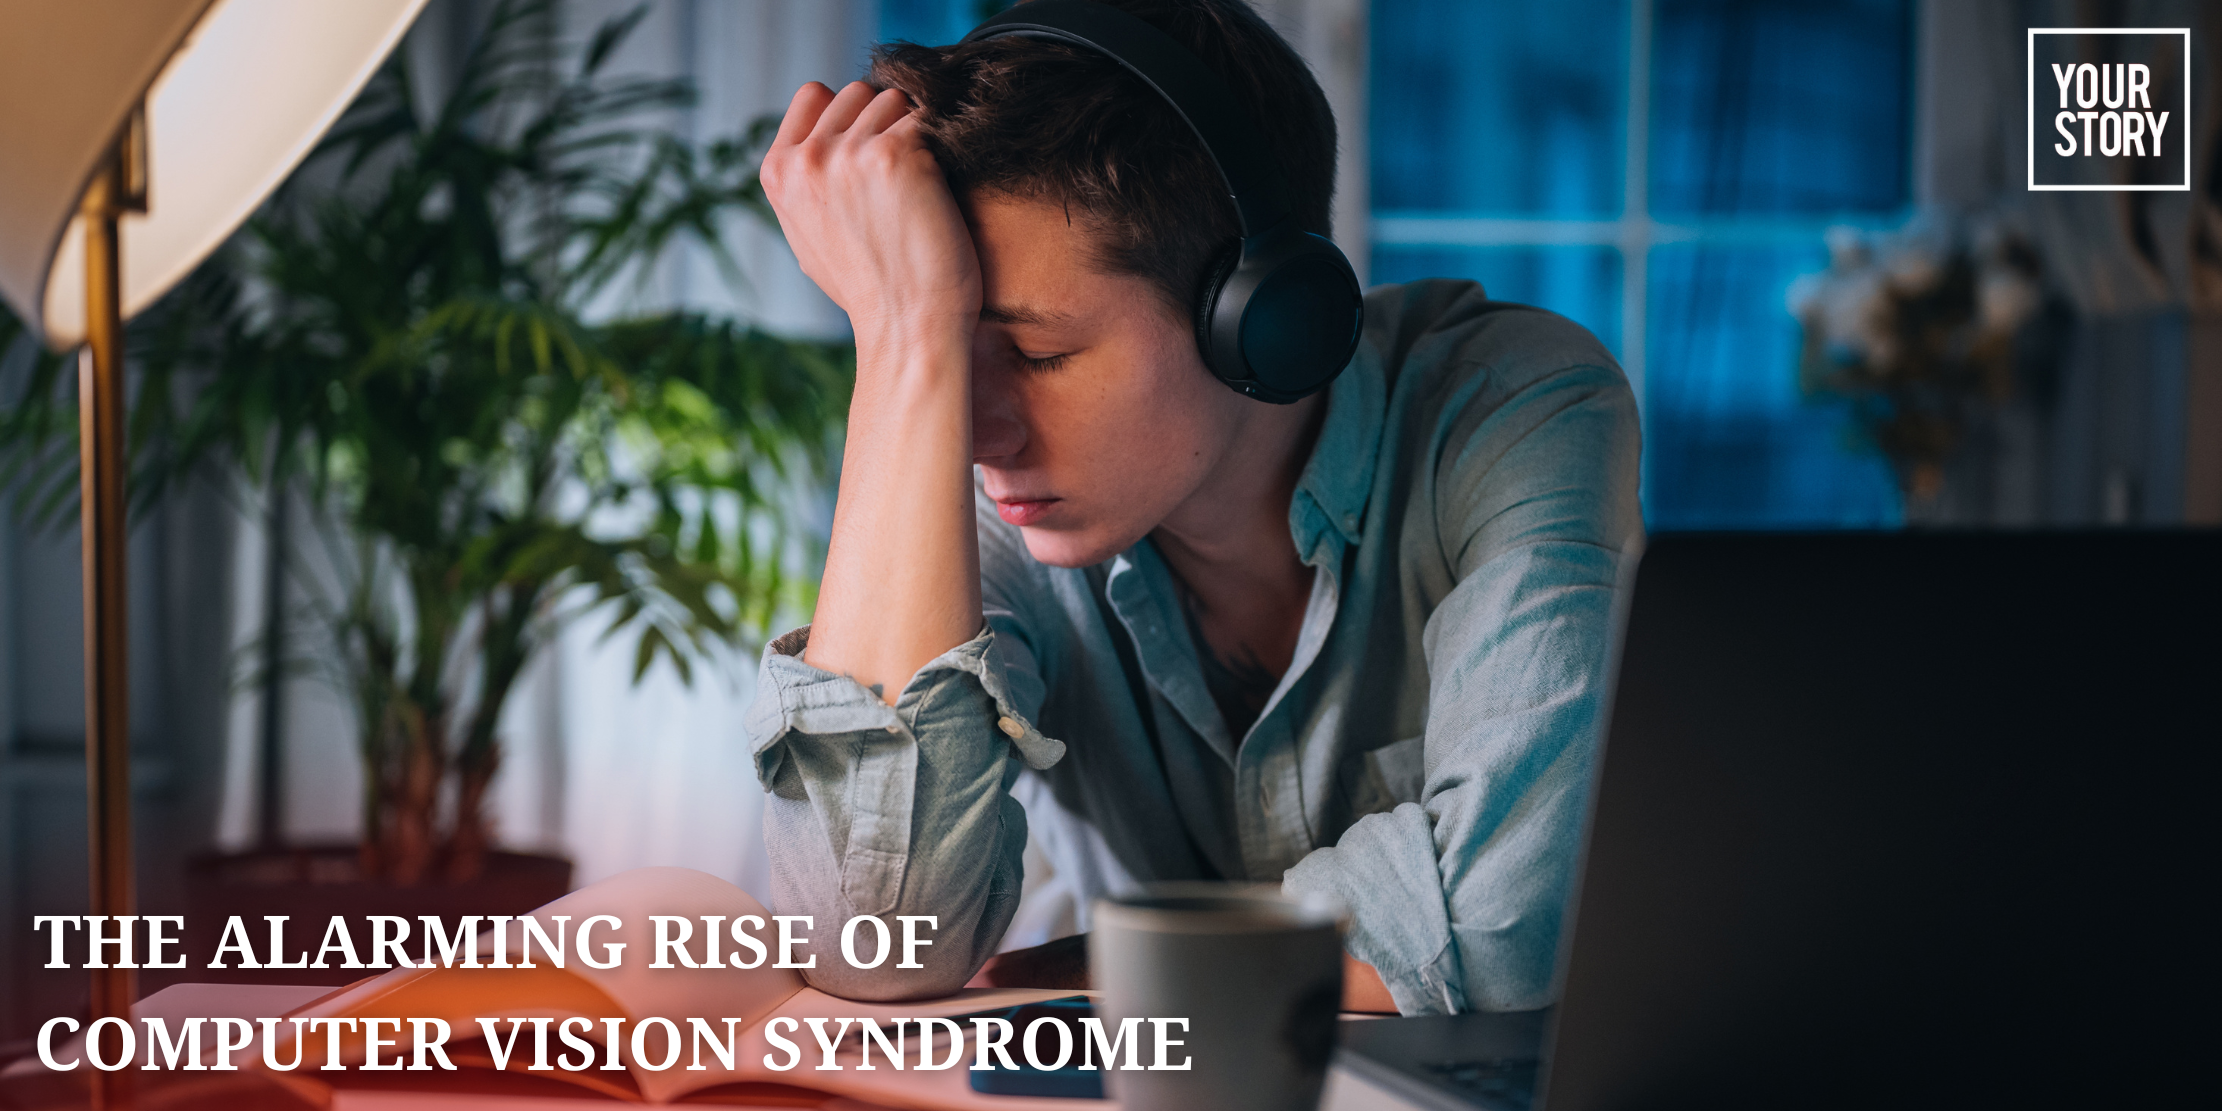 Is Your Computer Giving You a Headache? The Alarming Rise of Computer Vision Syndrome